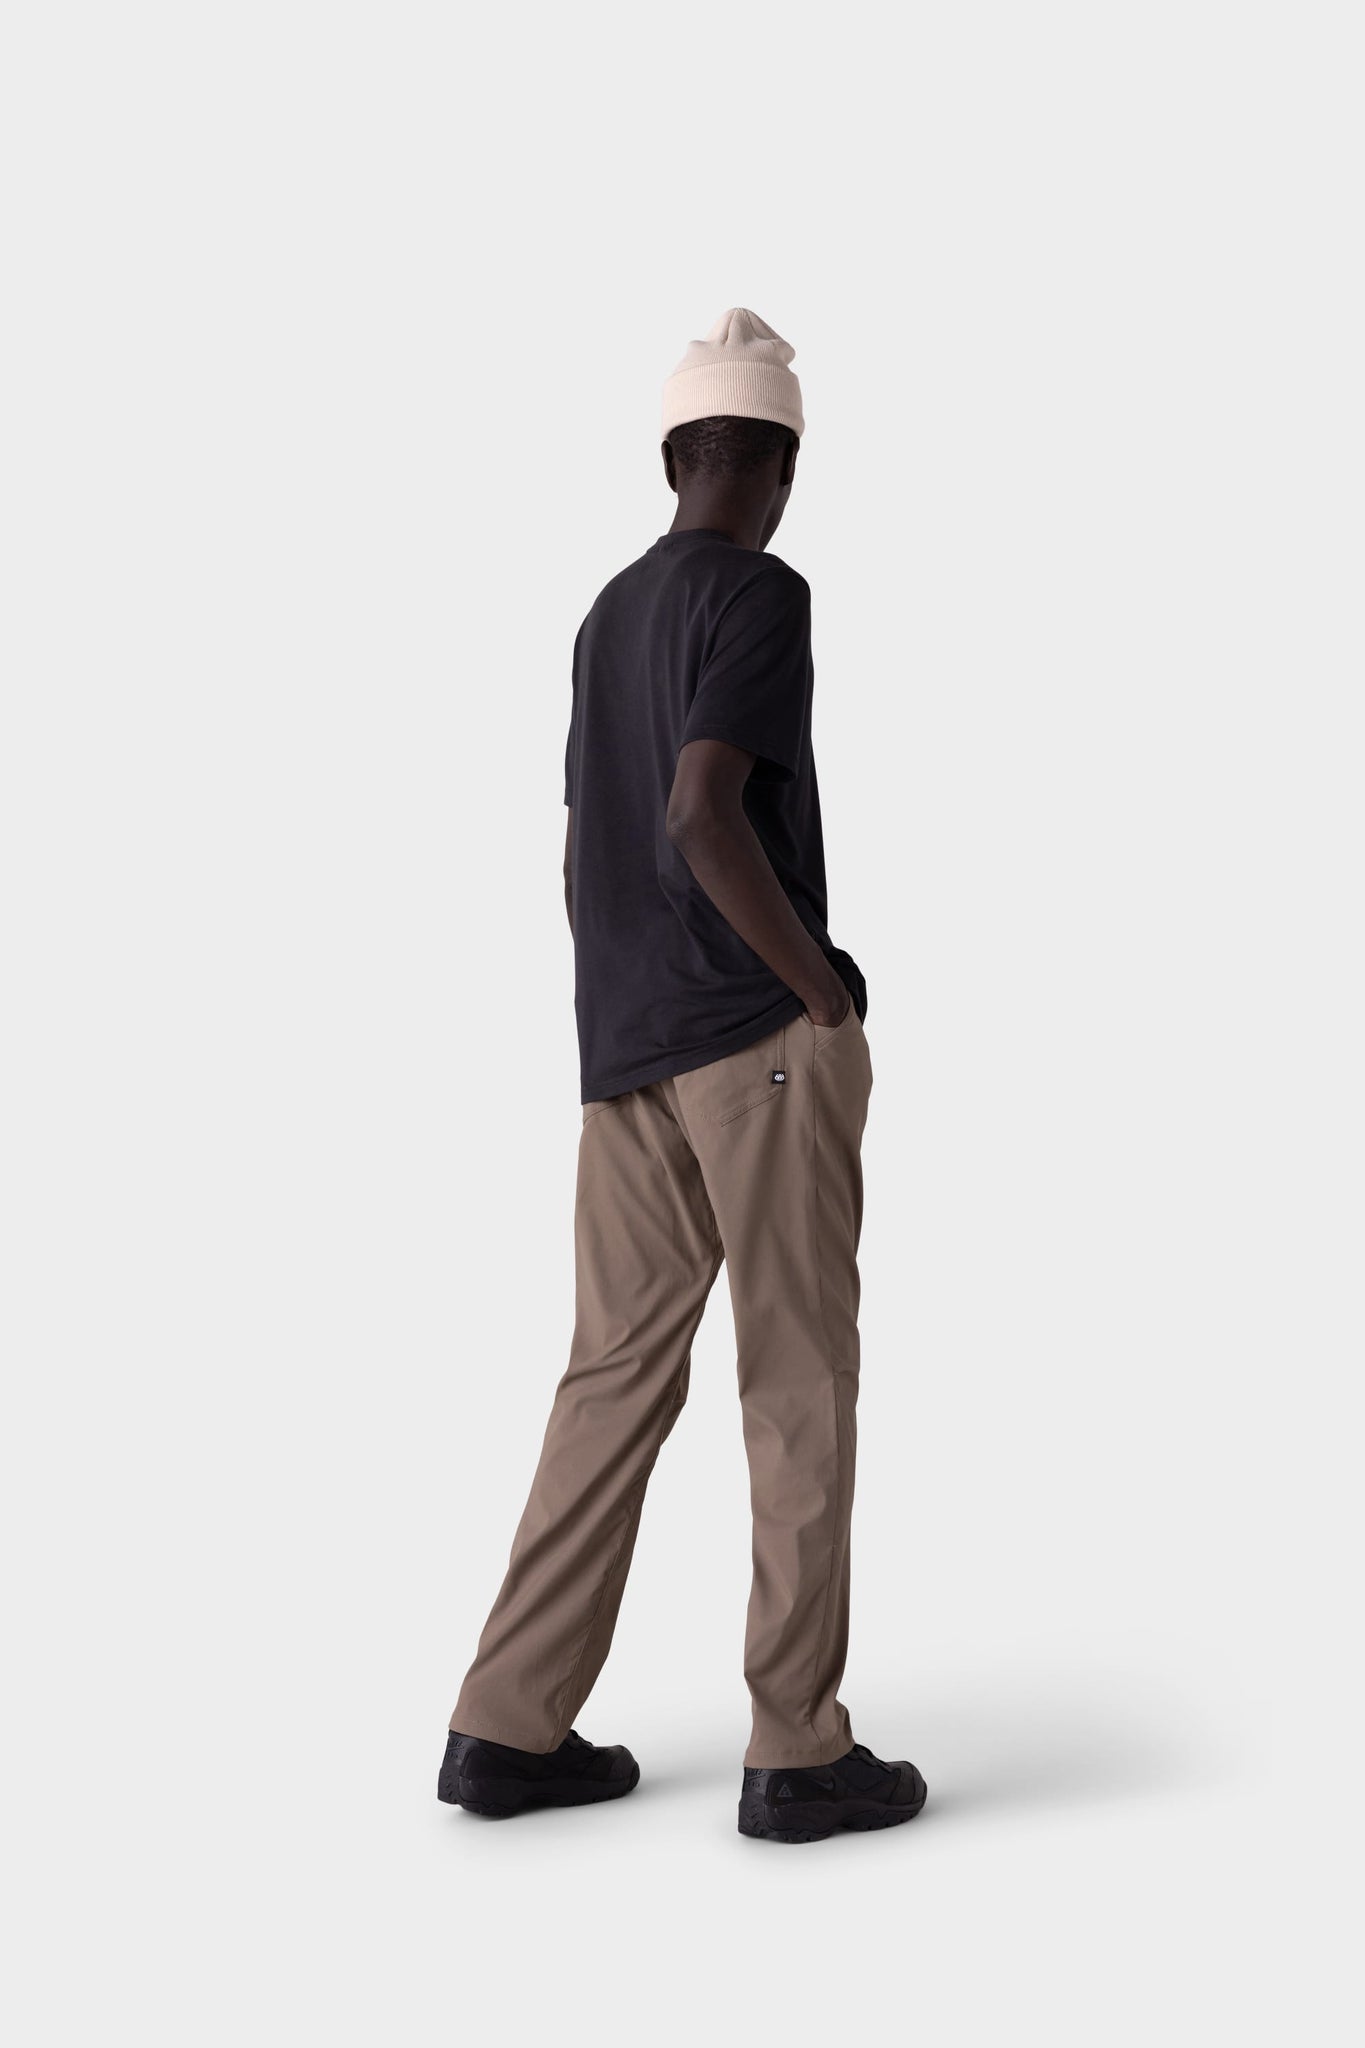 686 - Everywhere Pant Relaxed Fit Tobacco